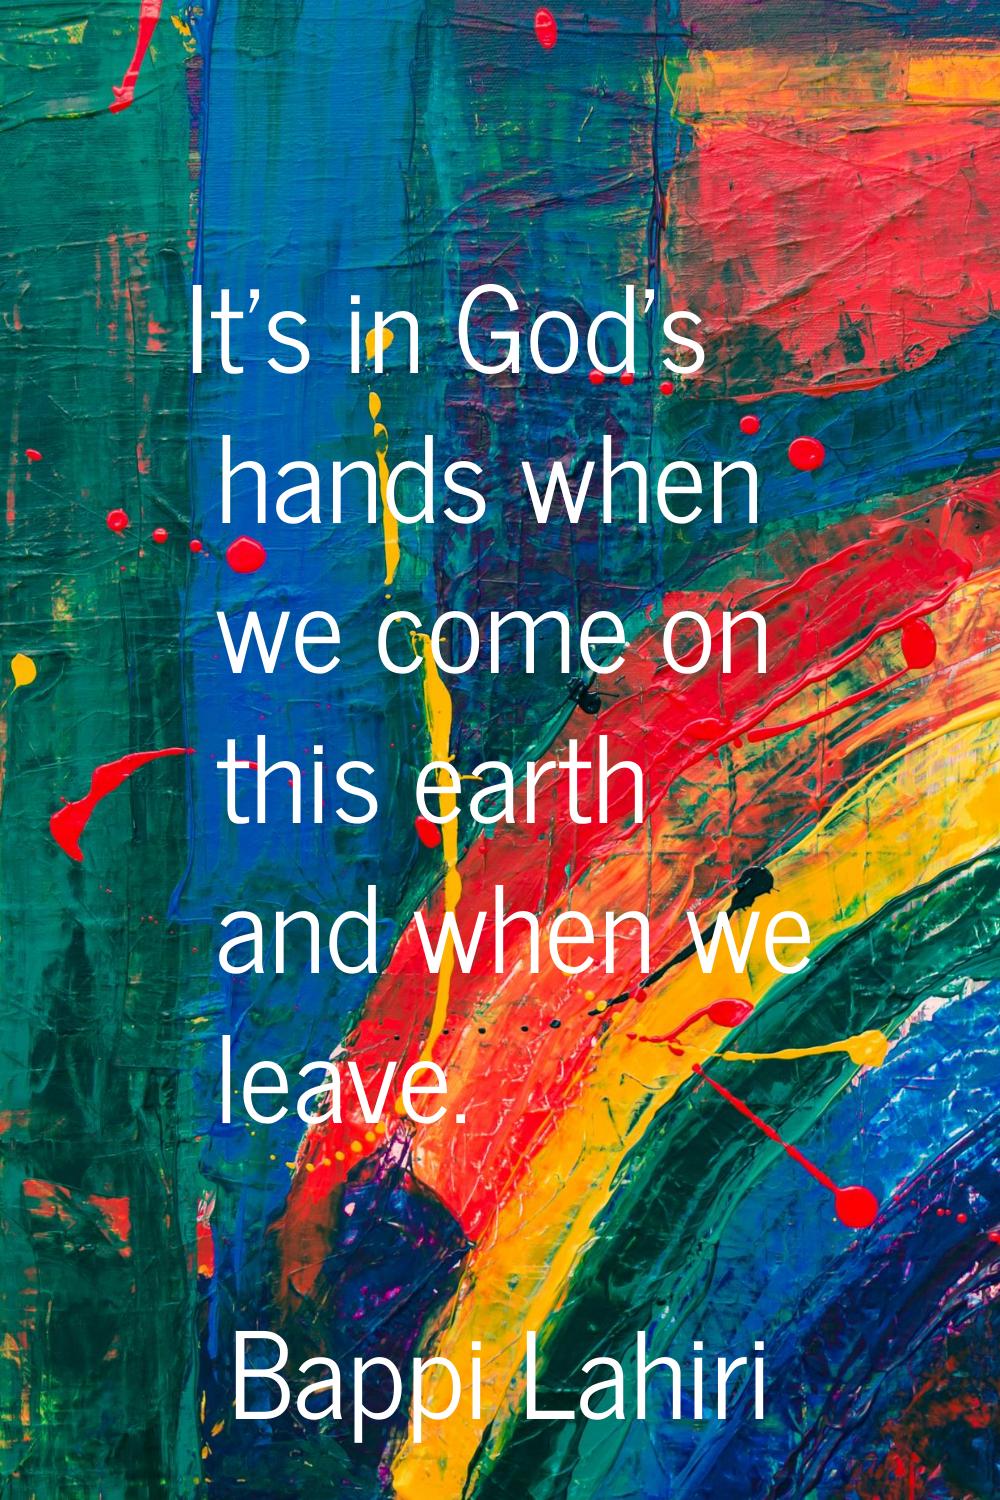 It's in God's hands when we come on this earth and when we leave.